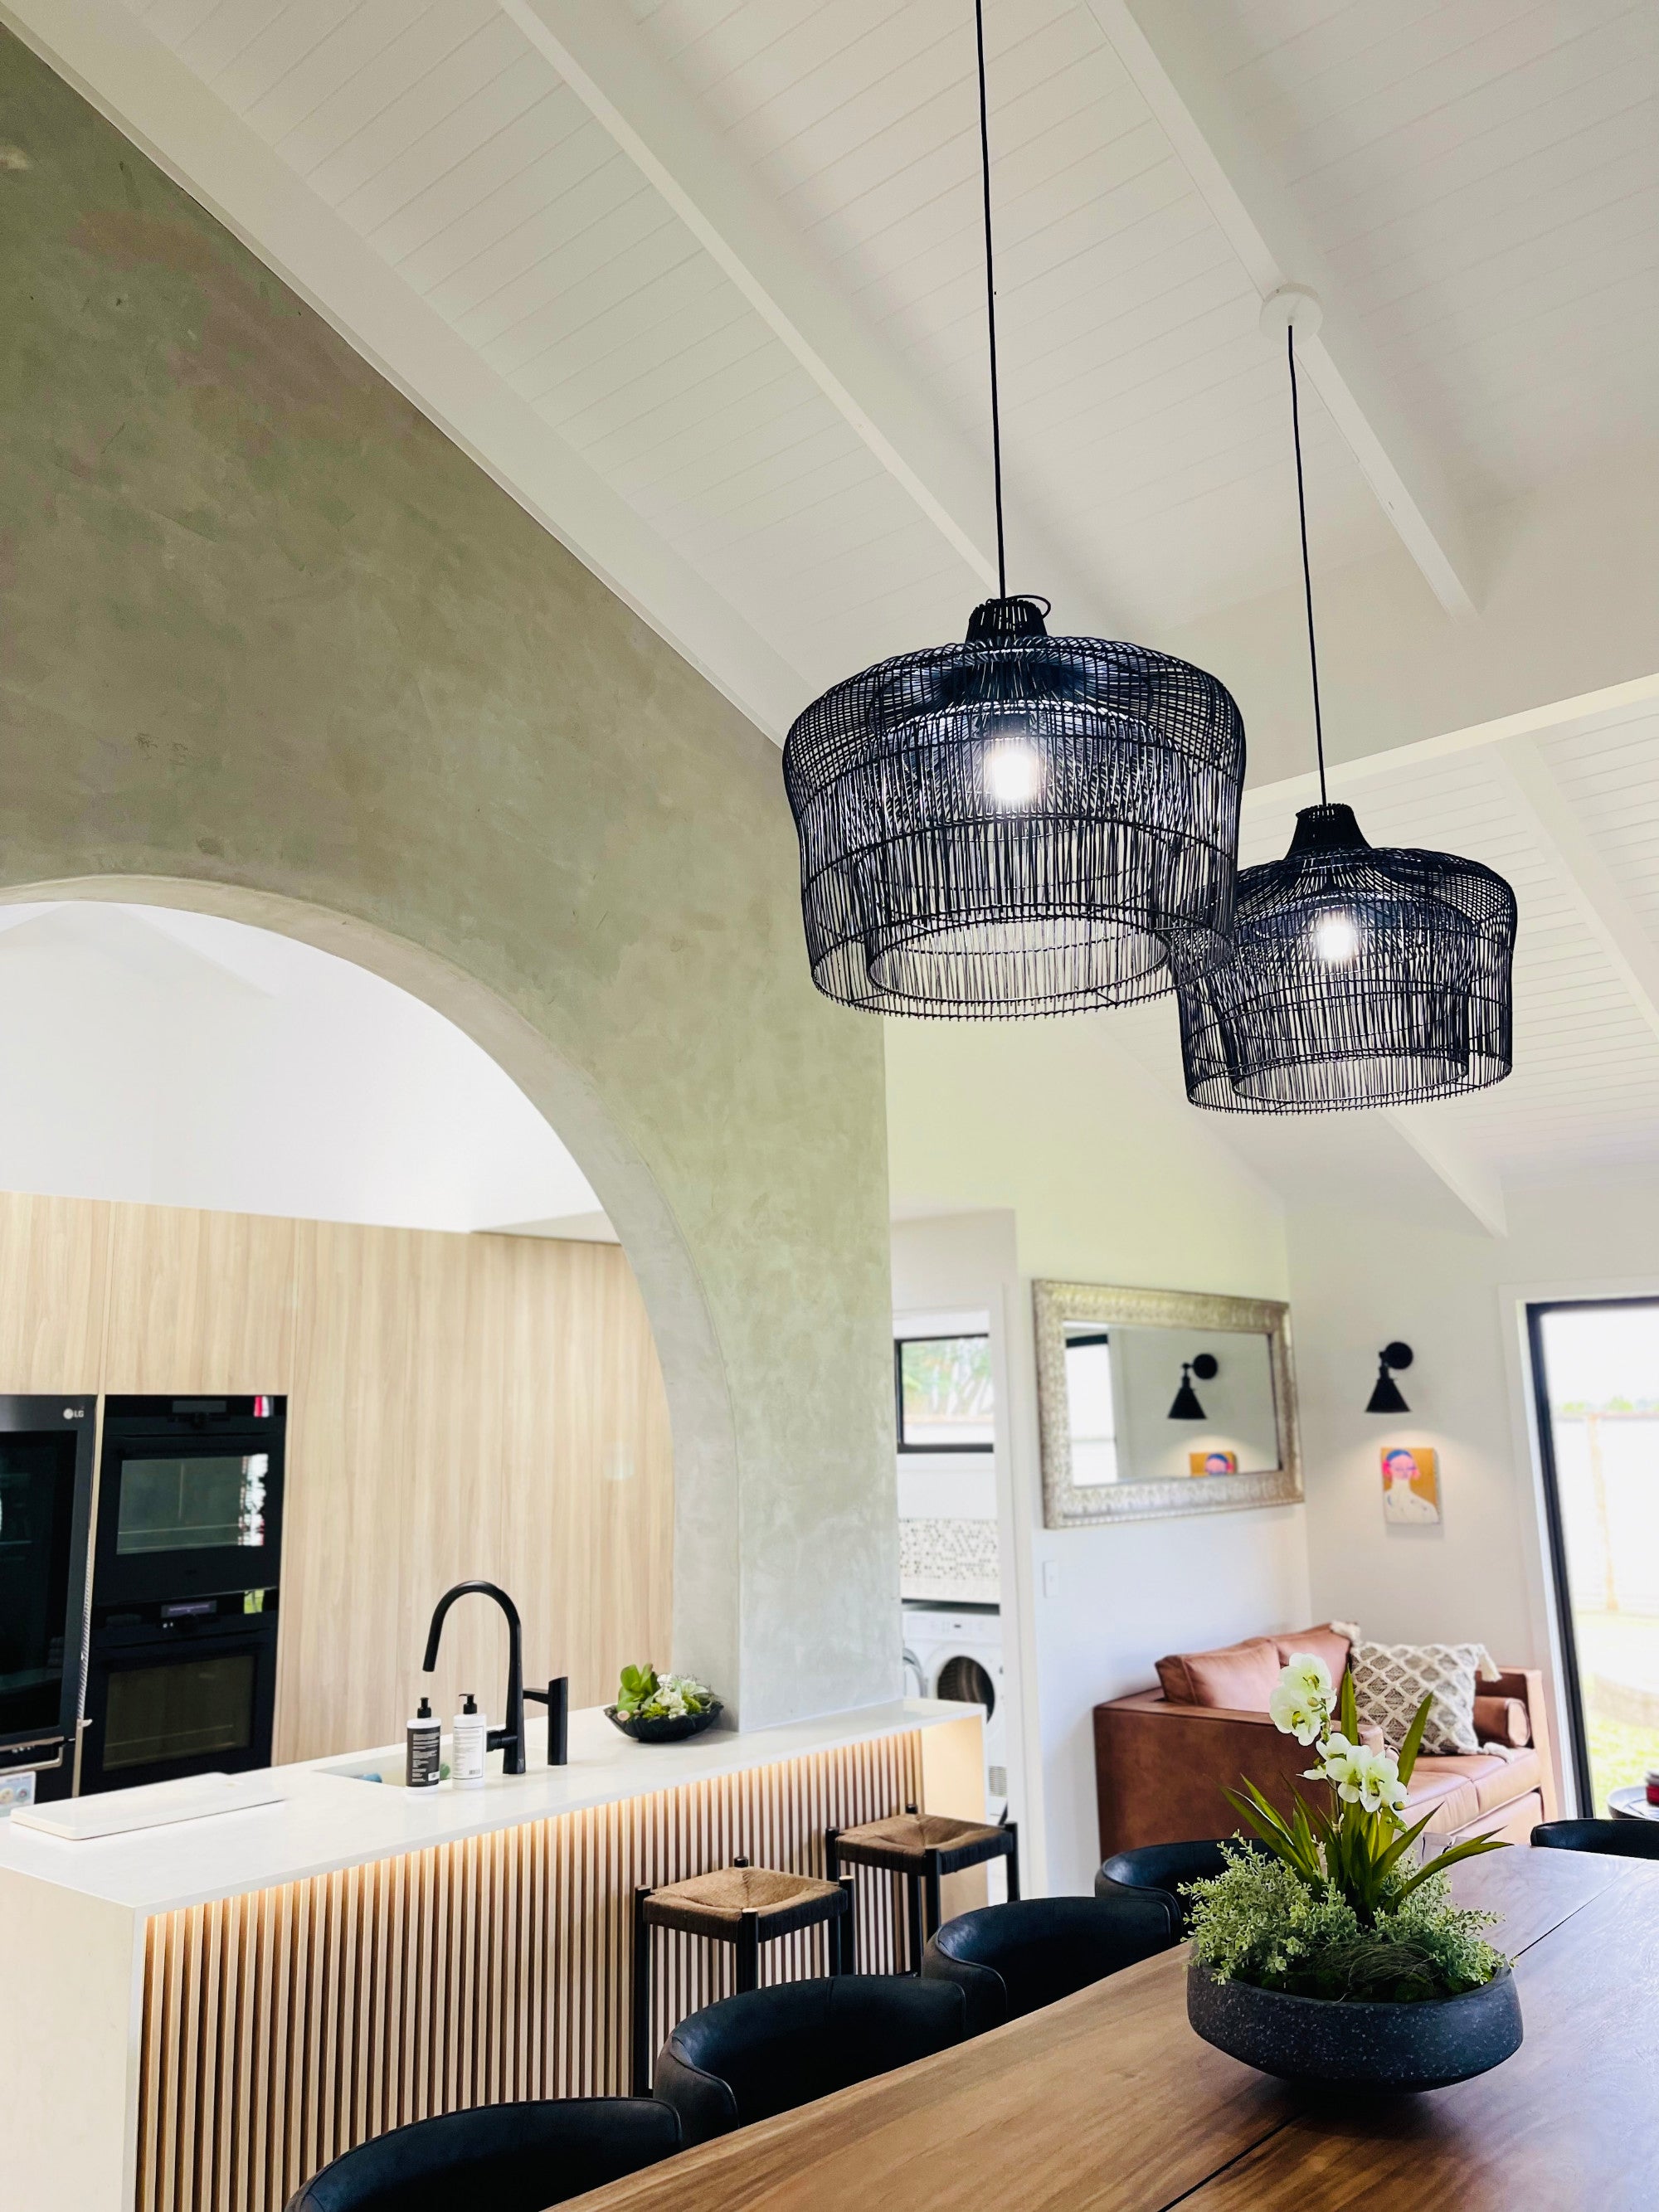 Two large Henley black sustainable pendant lights hanging above a timber dining table.